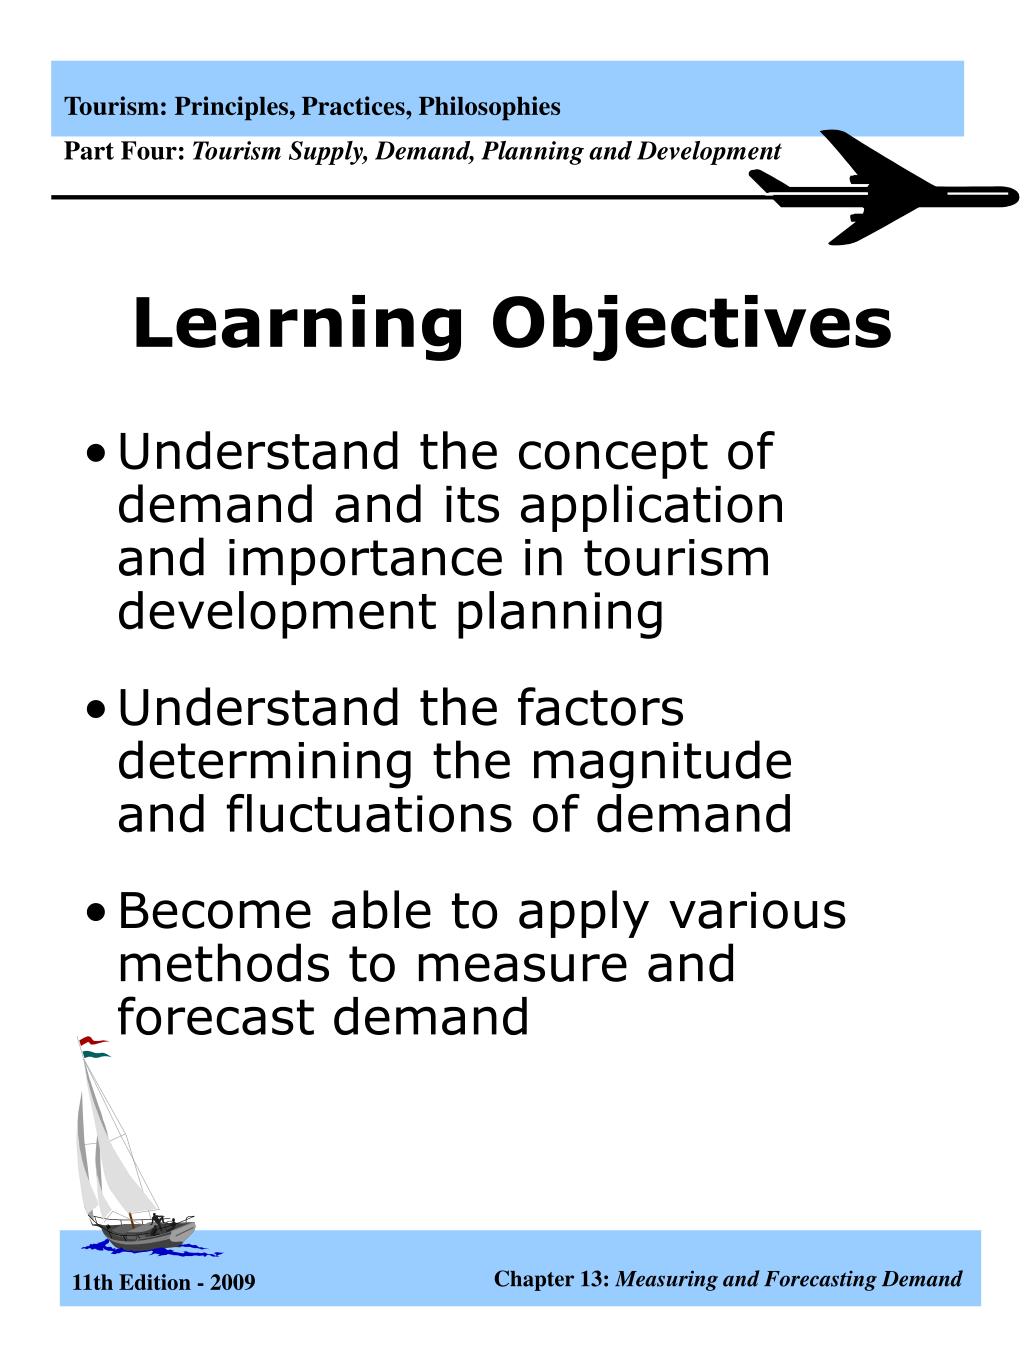 learning objectives examples for conference presentations